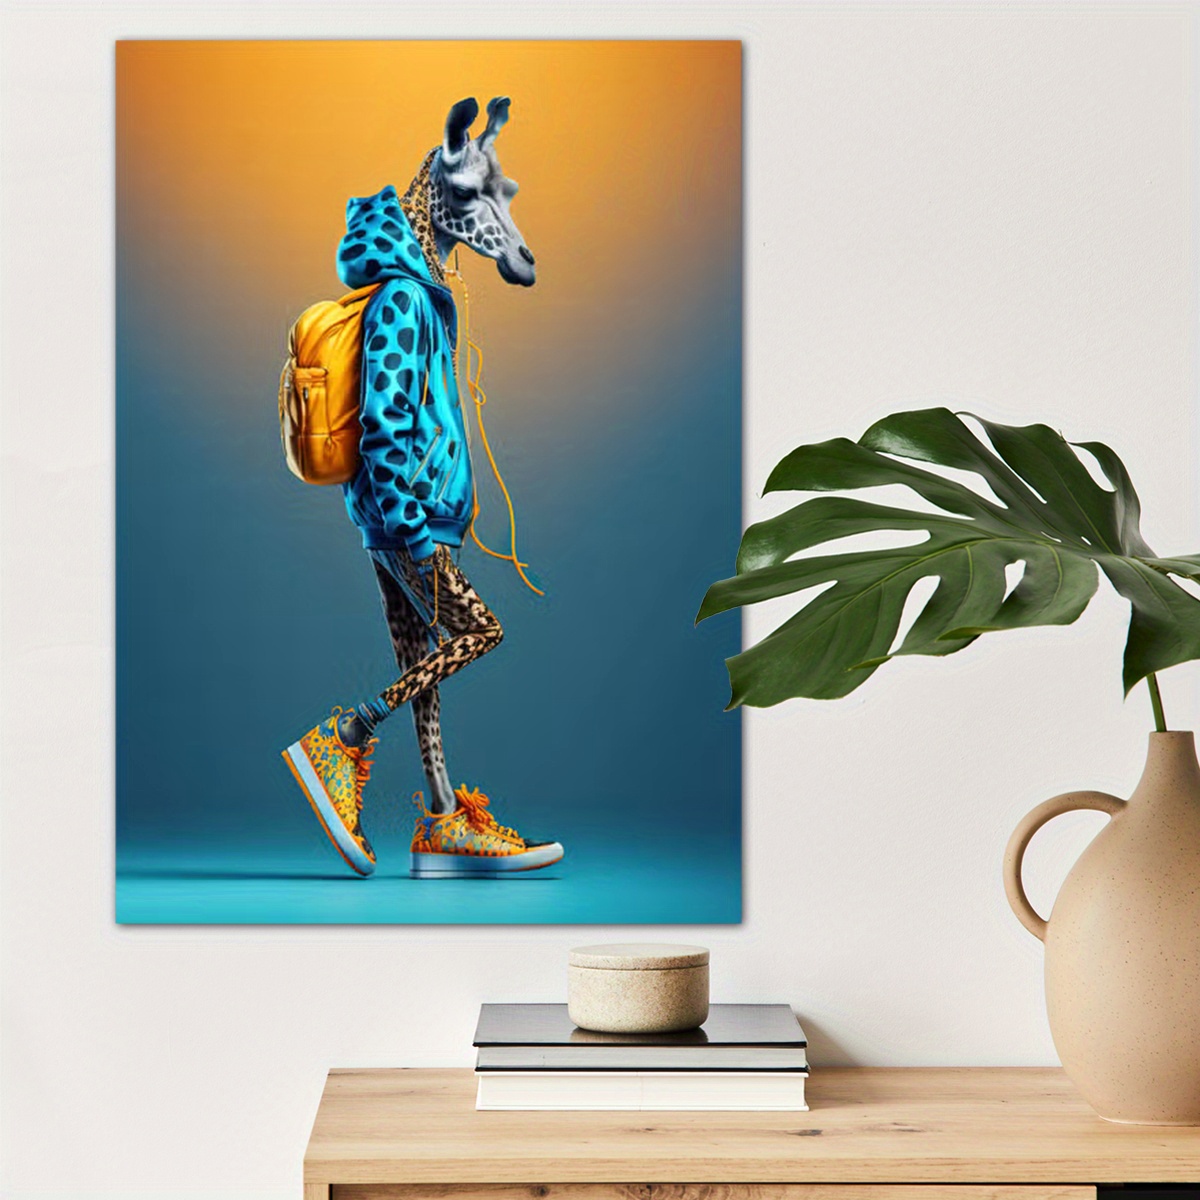 

1pc Funny Giraffe Dancer Canvas Wall Art For Home Decor, Animal Lovers Poster Wall Decor High Quality Canvas Prints For Living Room Bedroom Kitchen Office Cafe Decor, Perfect Gift And Decoration